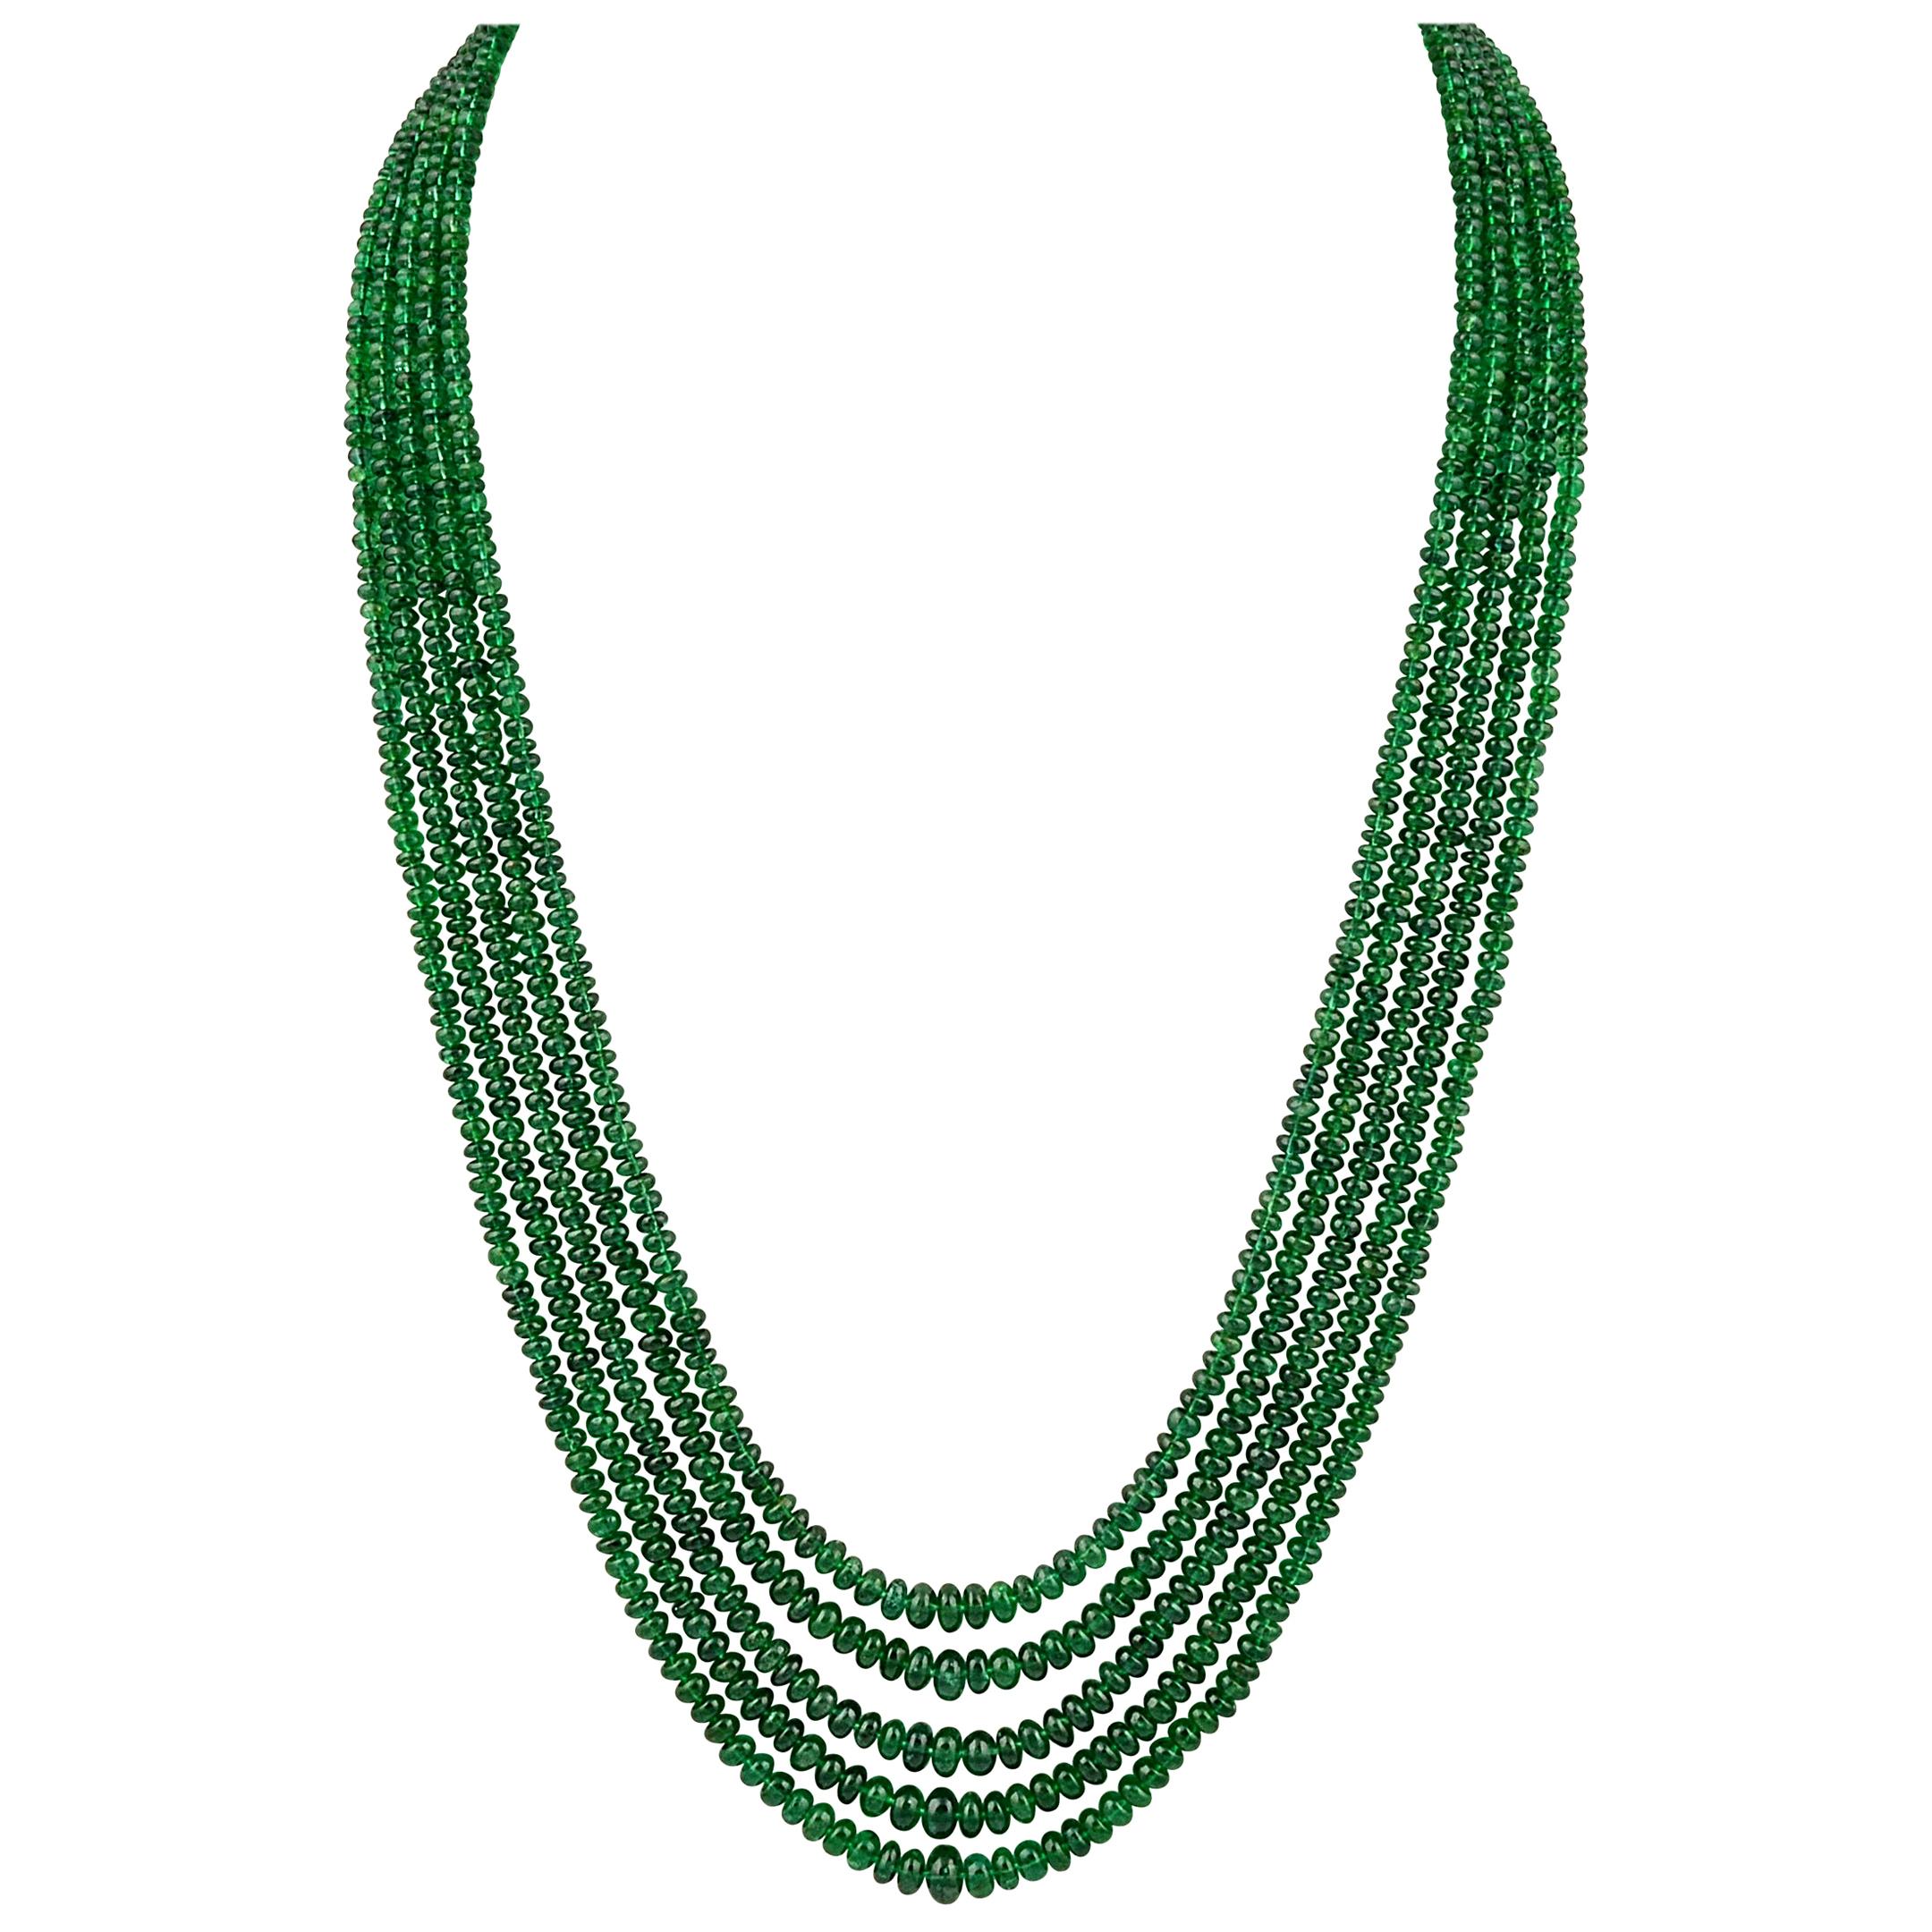 300ct Fine Emerald Beads 5 Line Necklace with 14 kt Yellow Gold Clasp Adjustable